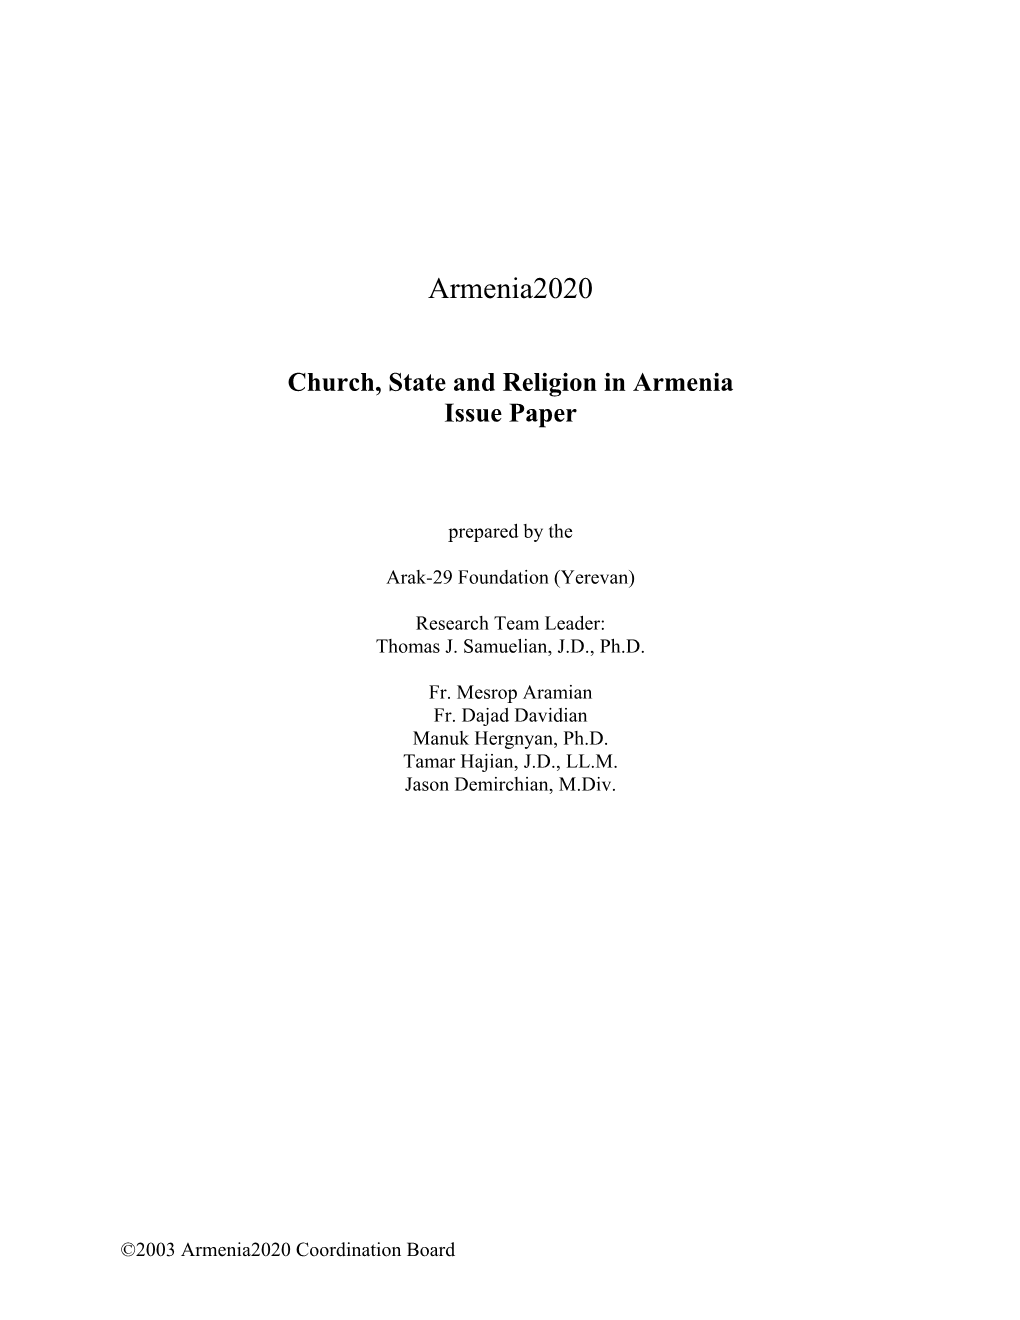 Church, State and Religion in Armenia Issue Paper